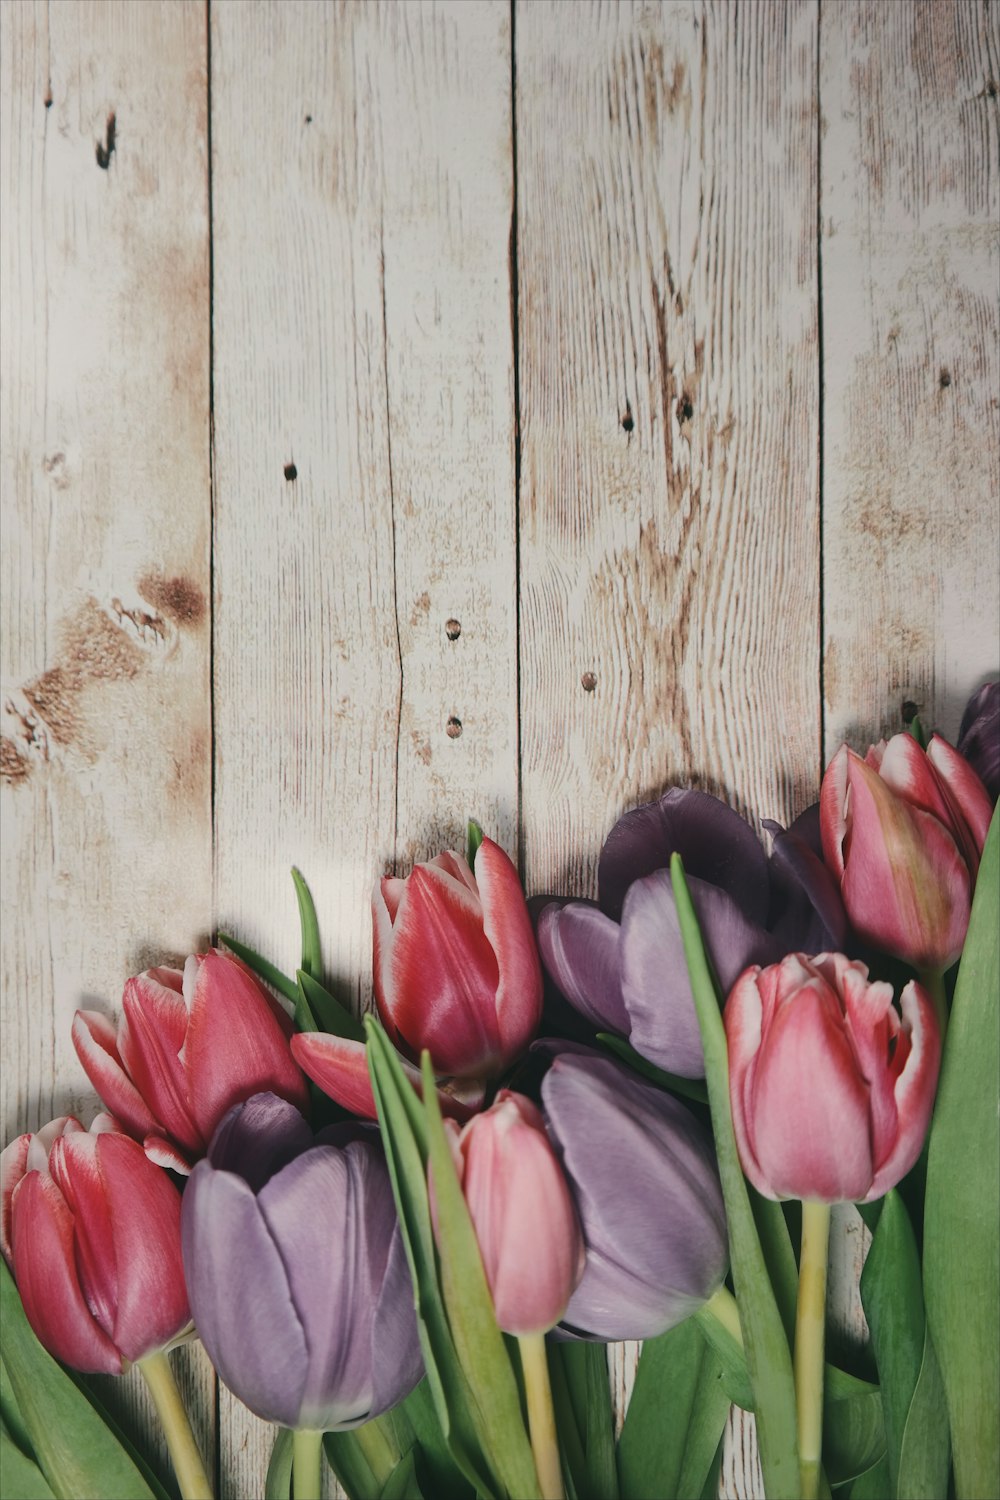 Macro shot of pink tulips on a wooden deck.